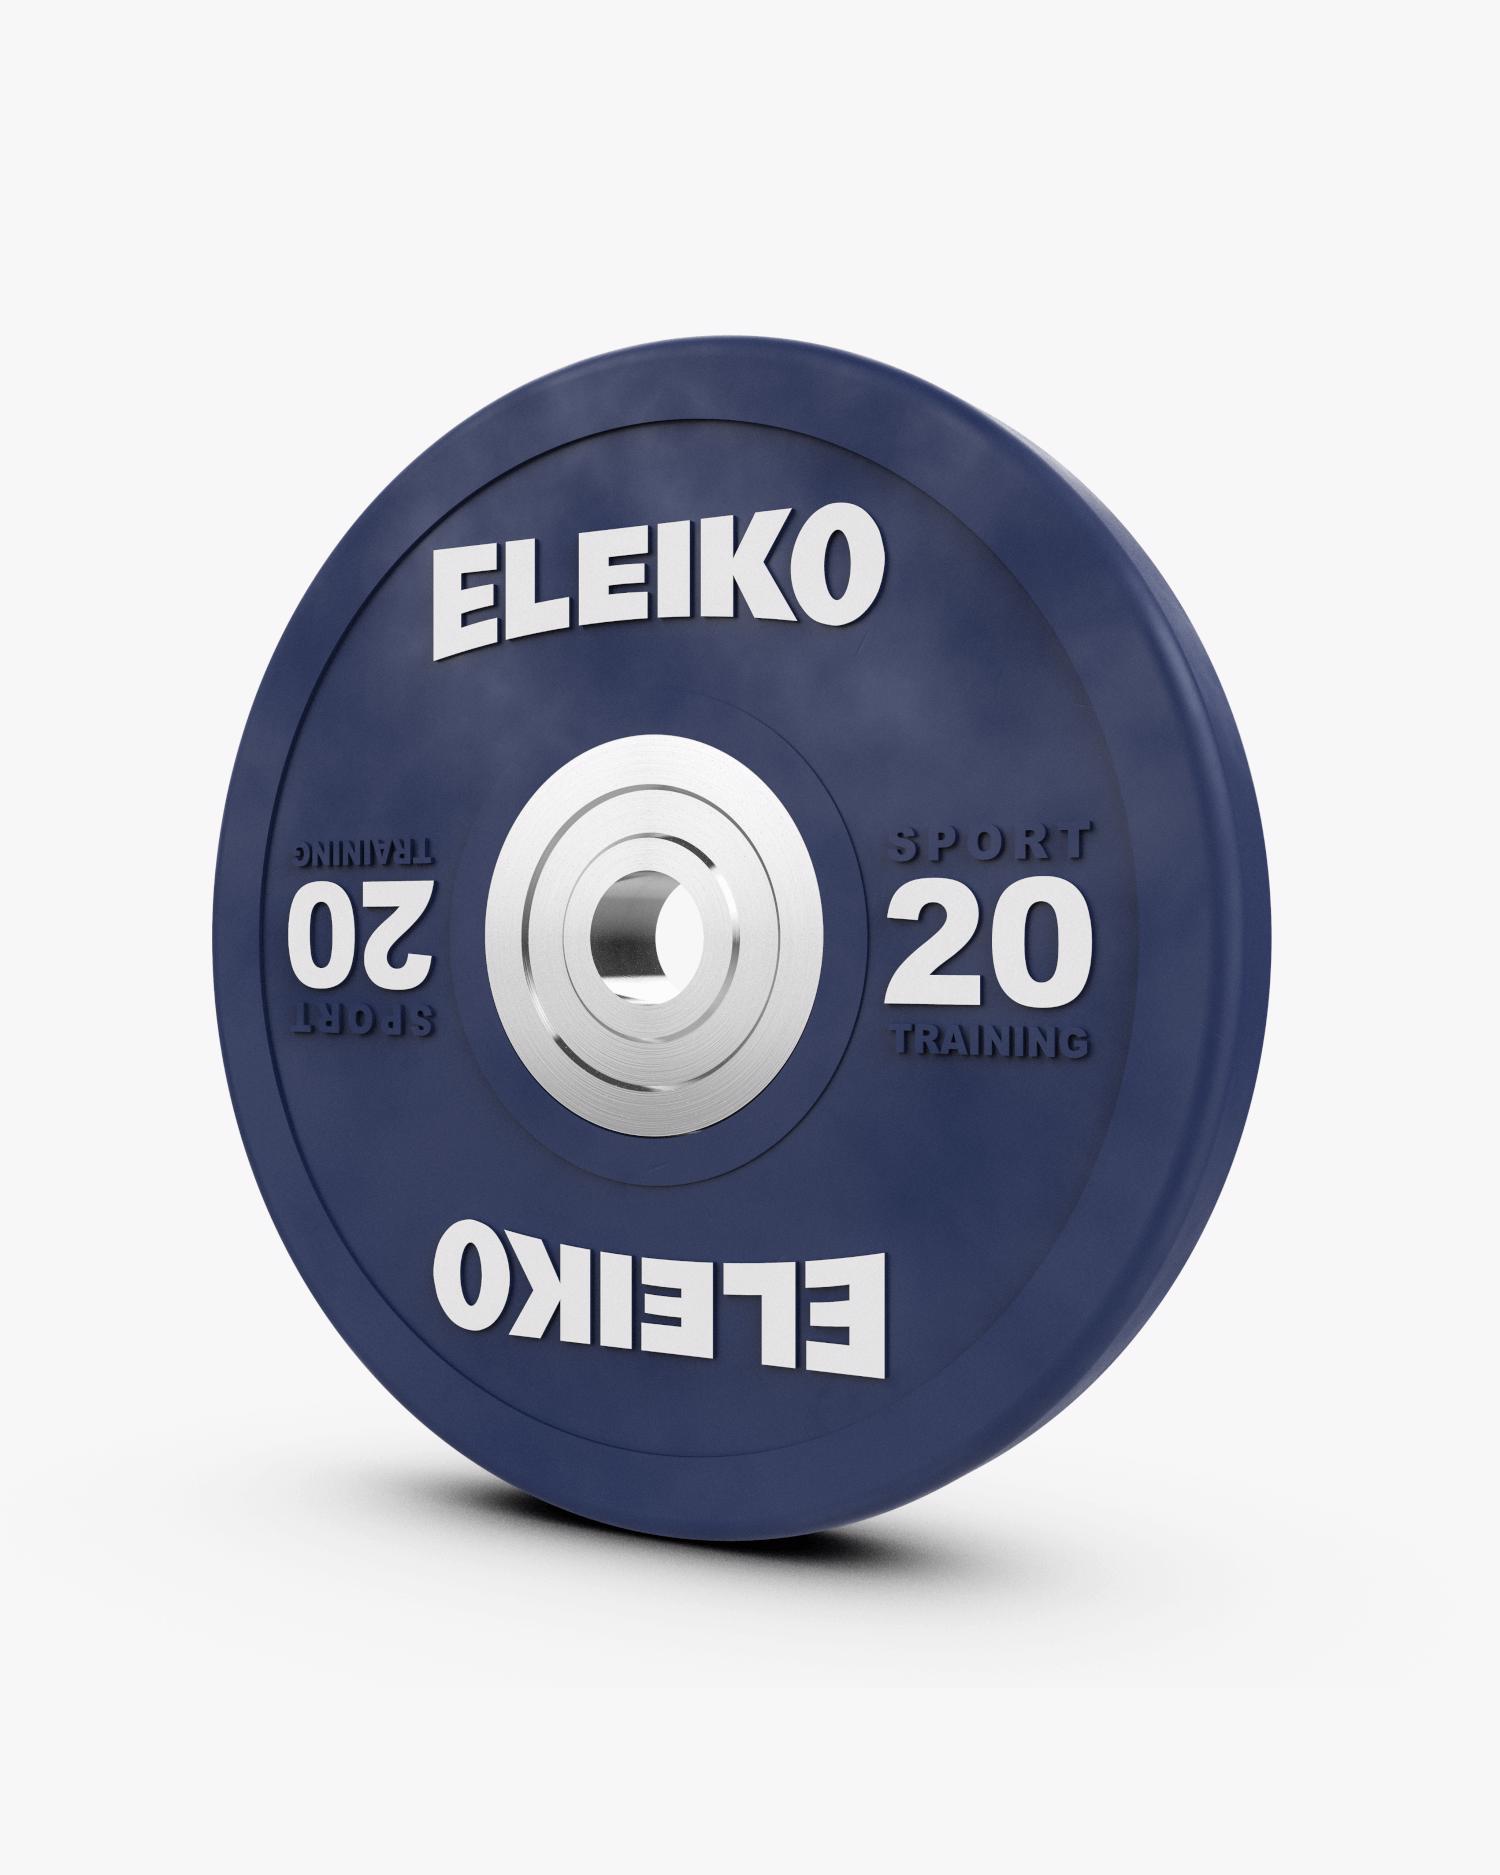 Eleiko & ROCKIT Free Weights, Functional and Accessories – Blue Fitness Ltd